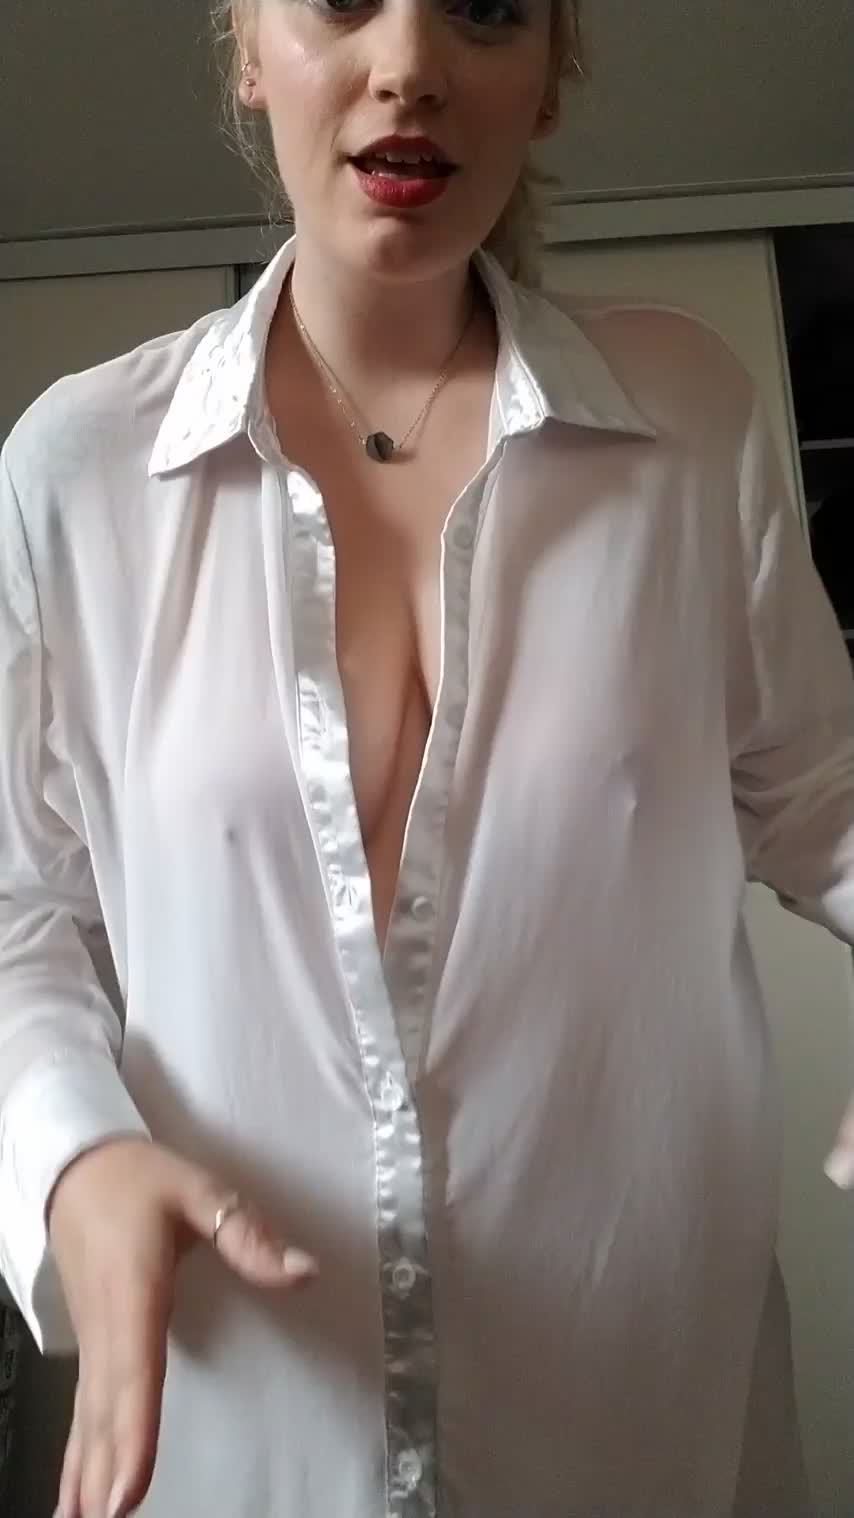 Help me fill these bouncy titties with milk ;) : video clip